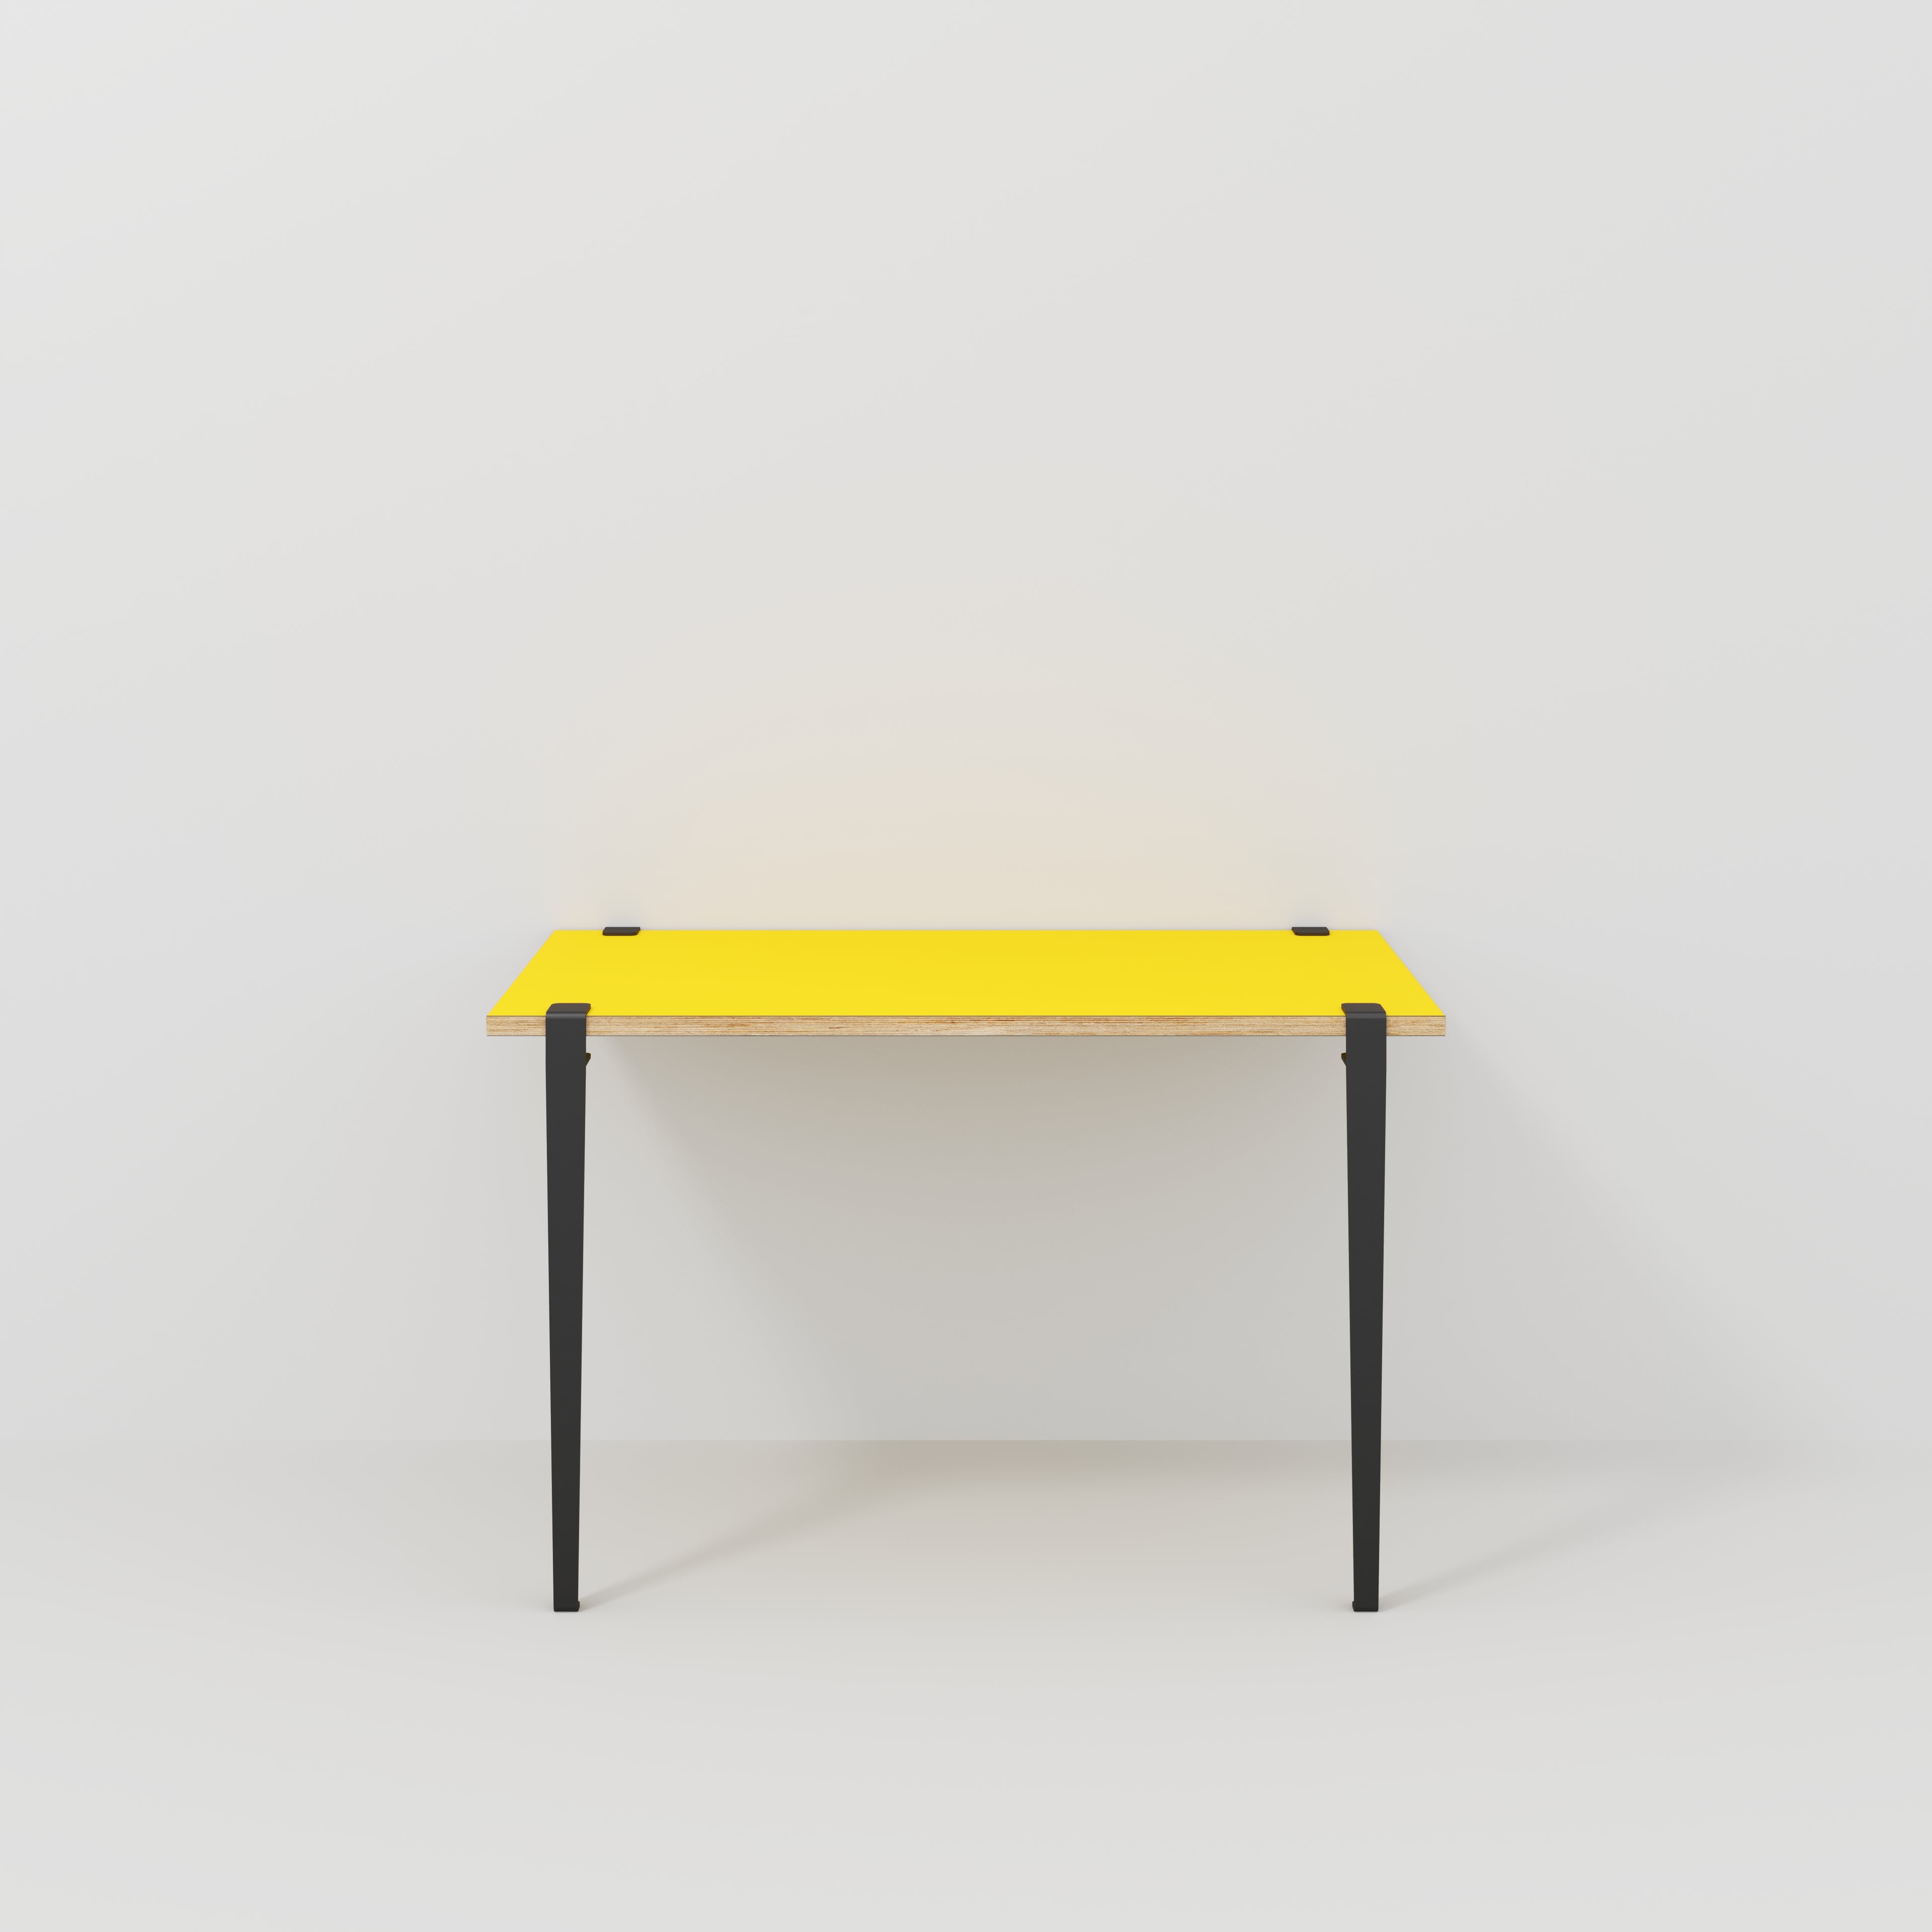 Wall Desk with Black Tiptoe Legs and Brackets - Formica Chrome Yellow - 1200(w) x 600(d) x 750(h)